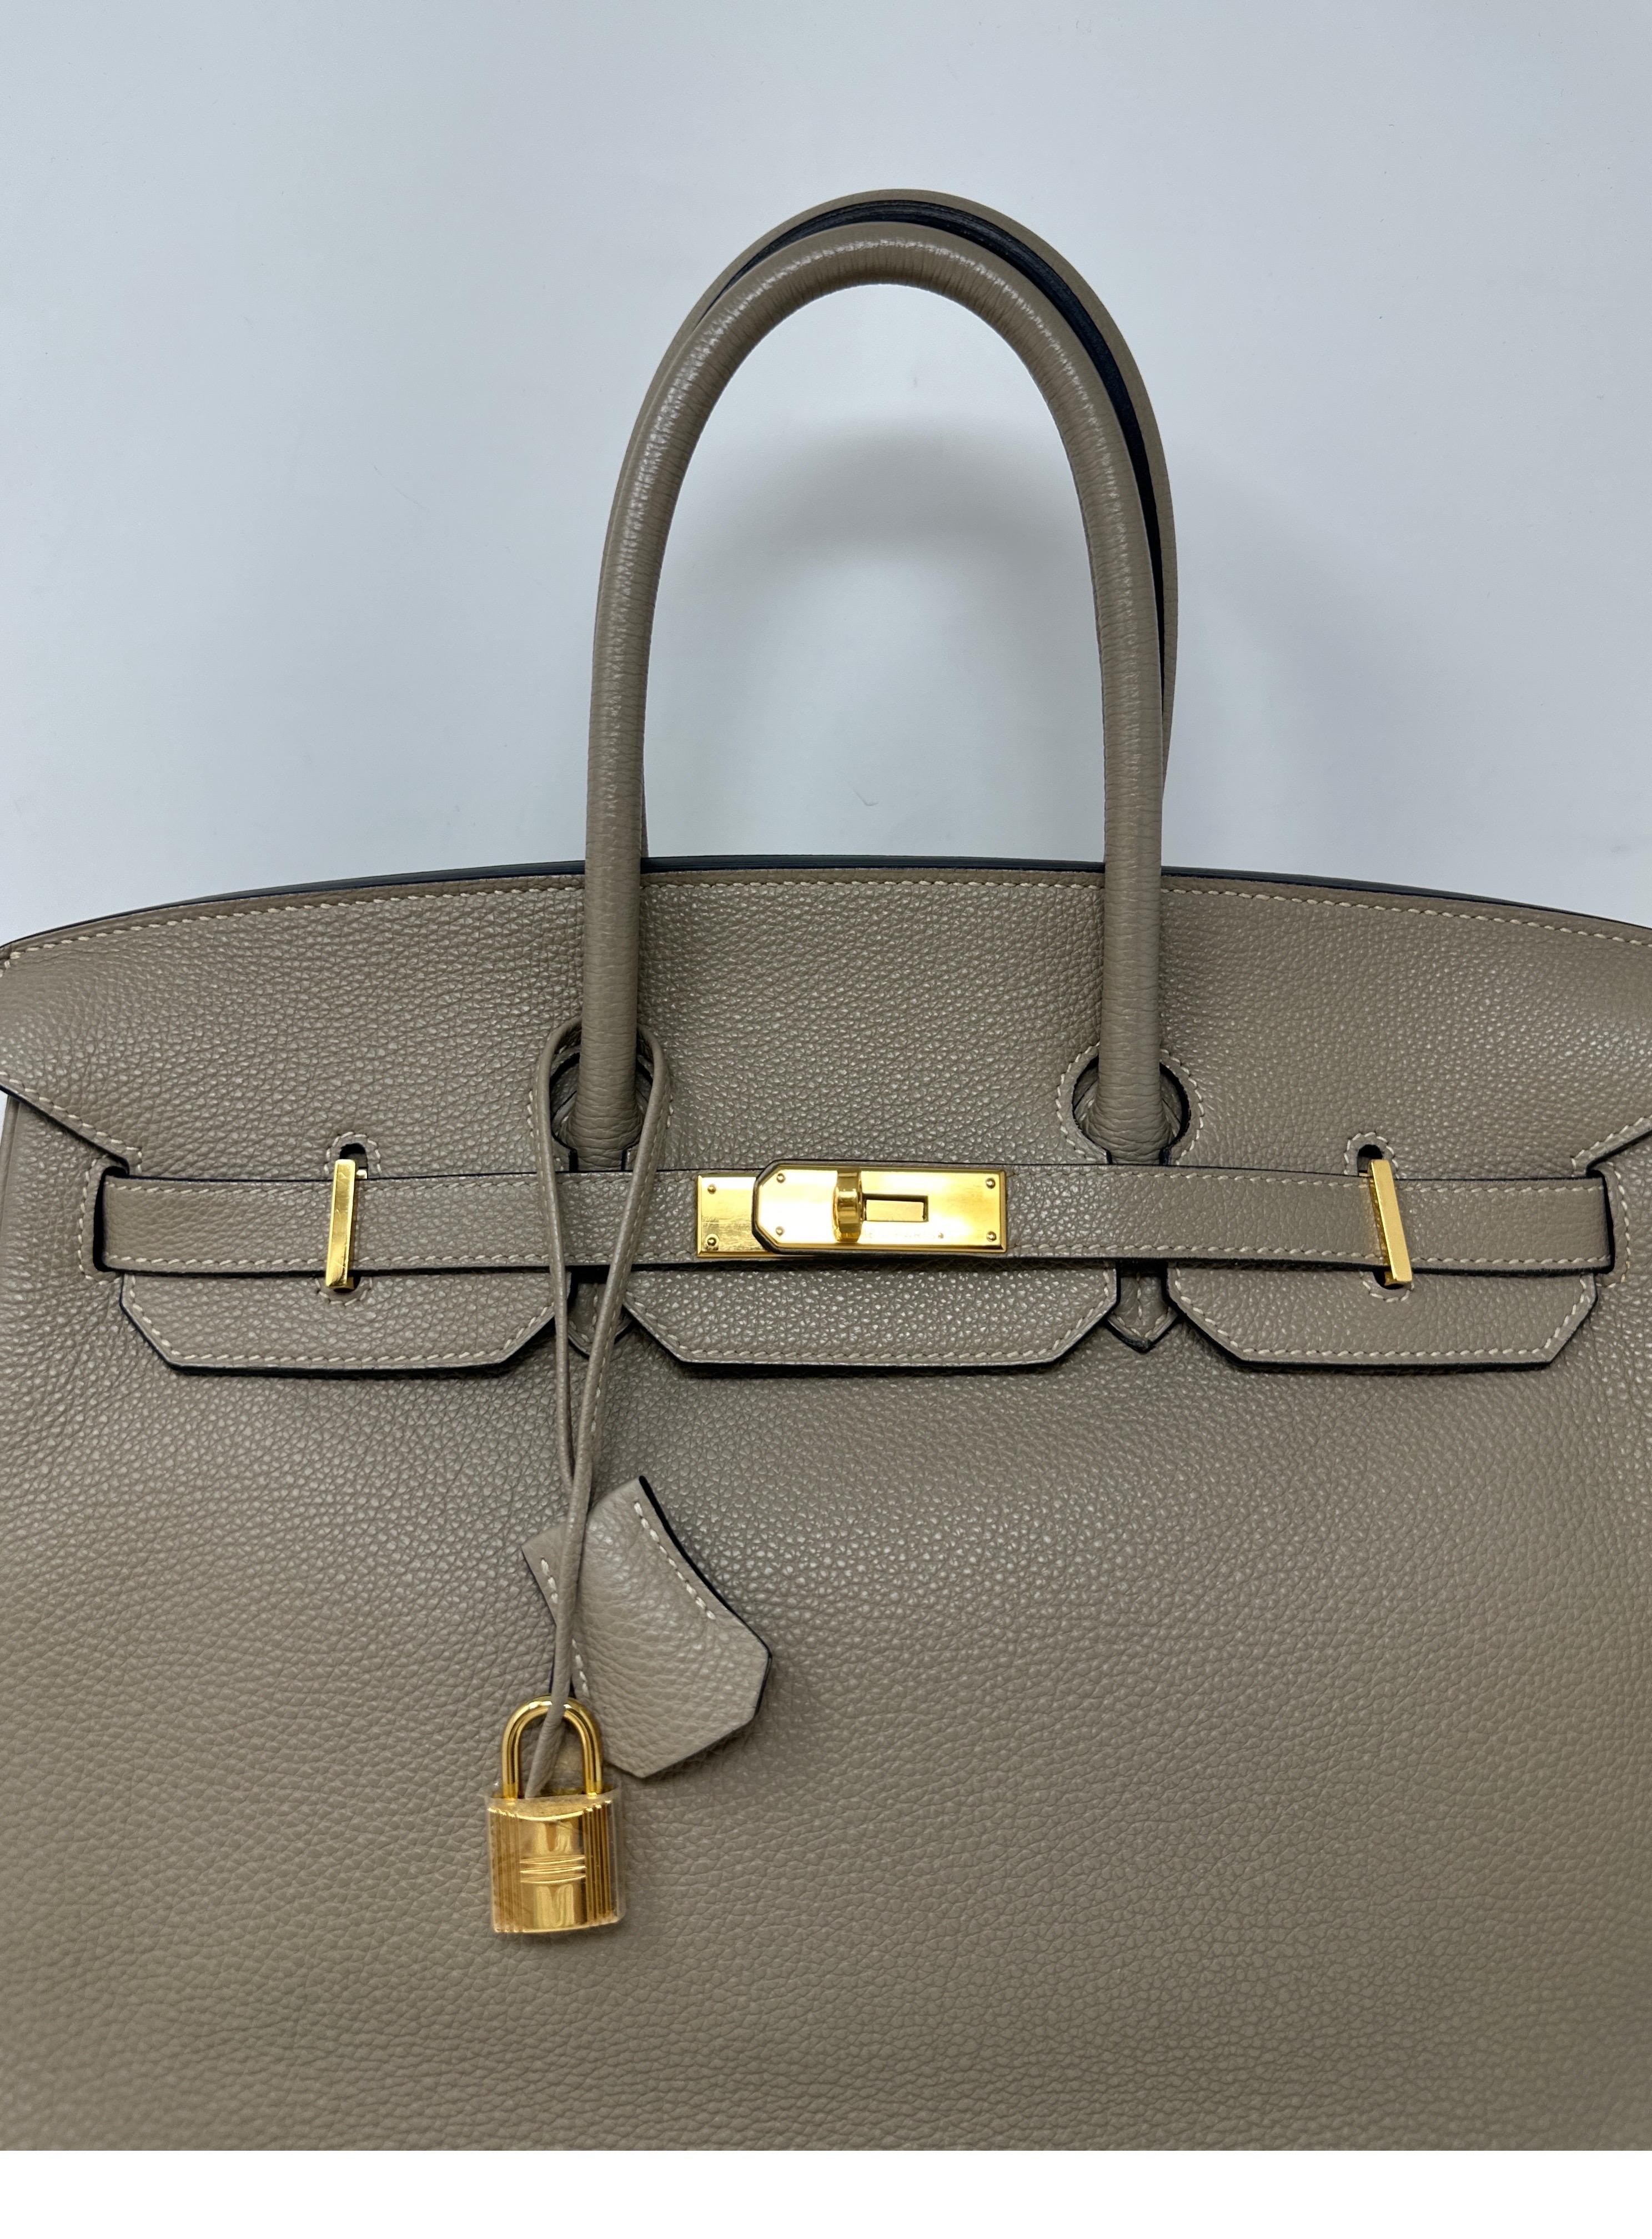 Hermes Gris Tourterelle Birkin 35 Bag. Gold hardware. Rare combination. Harder to find with gold. Interior clean. Includes clochette, lock, keys, and dust bag. Guaranteed authentic. Don't miss out on this investment bag. 